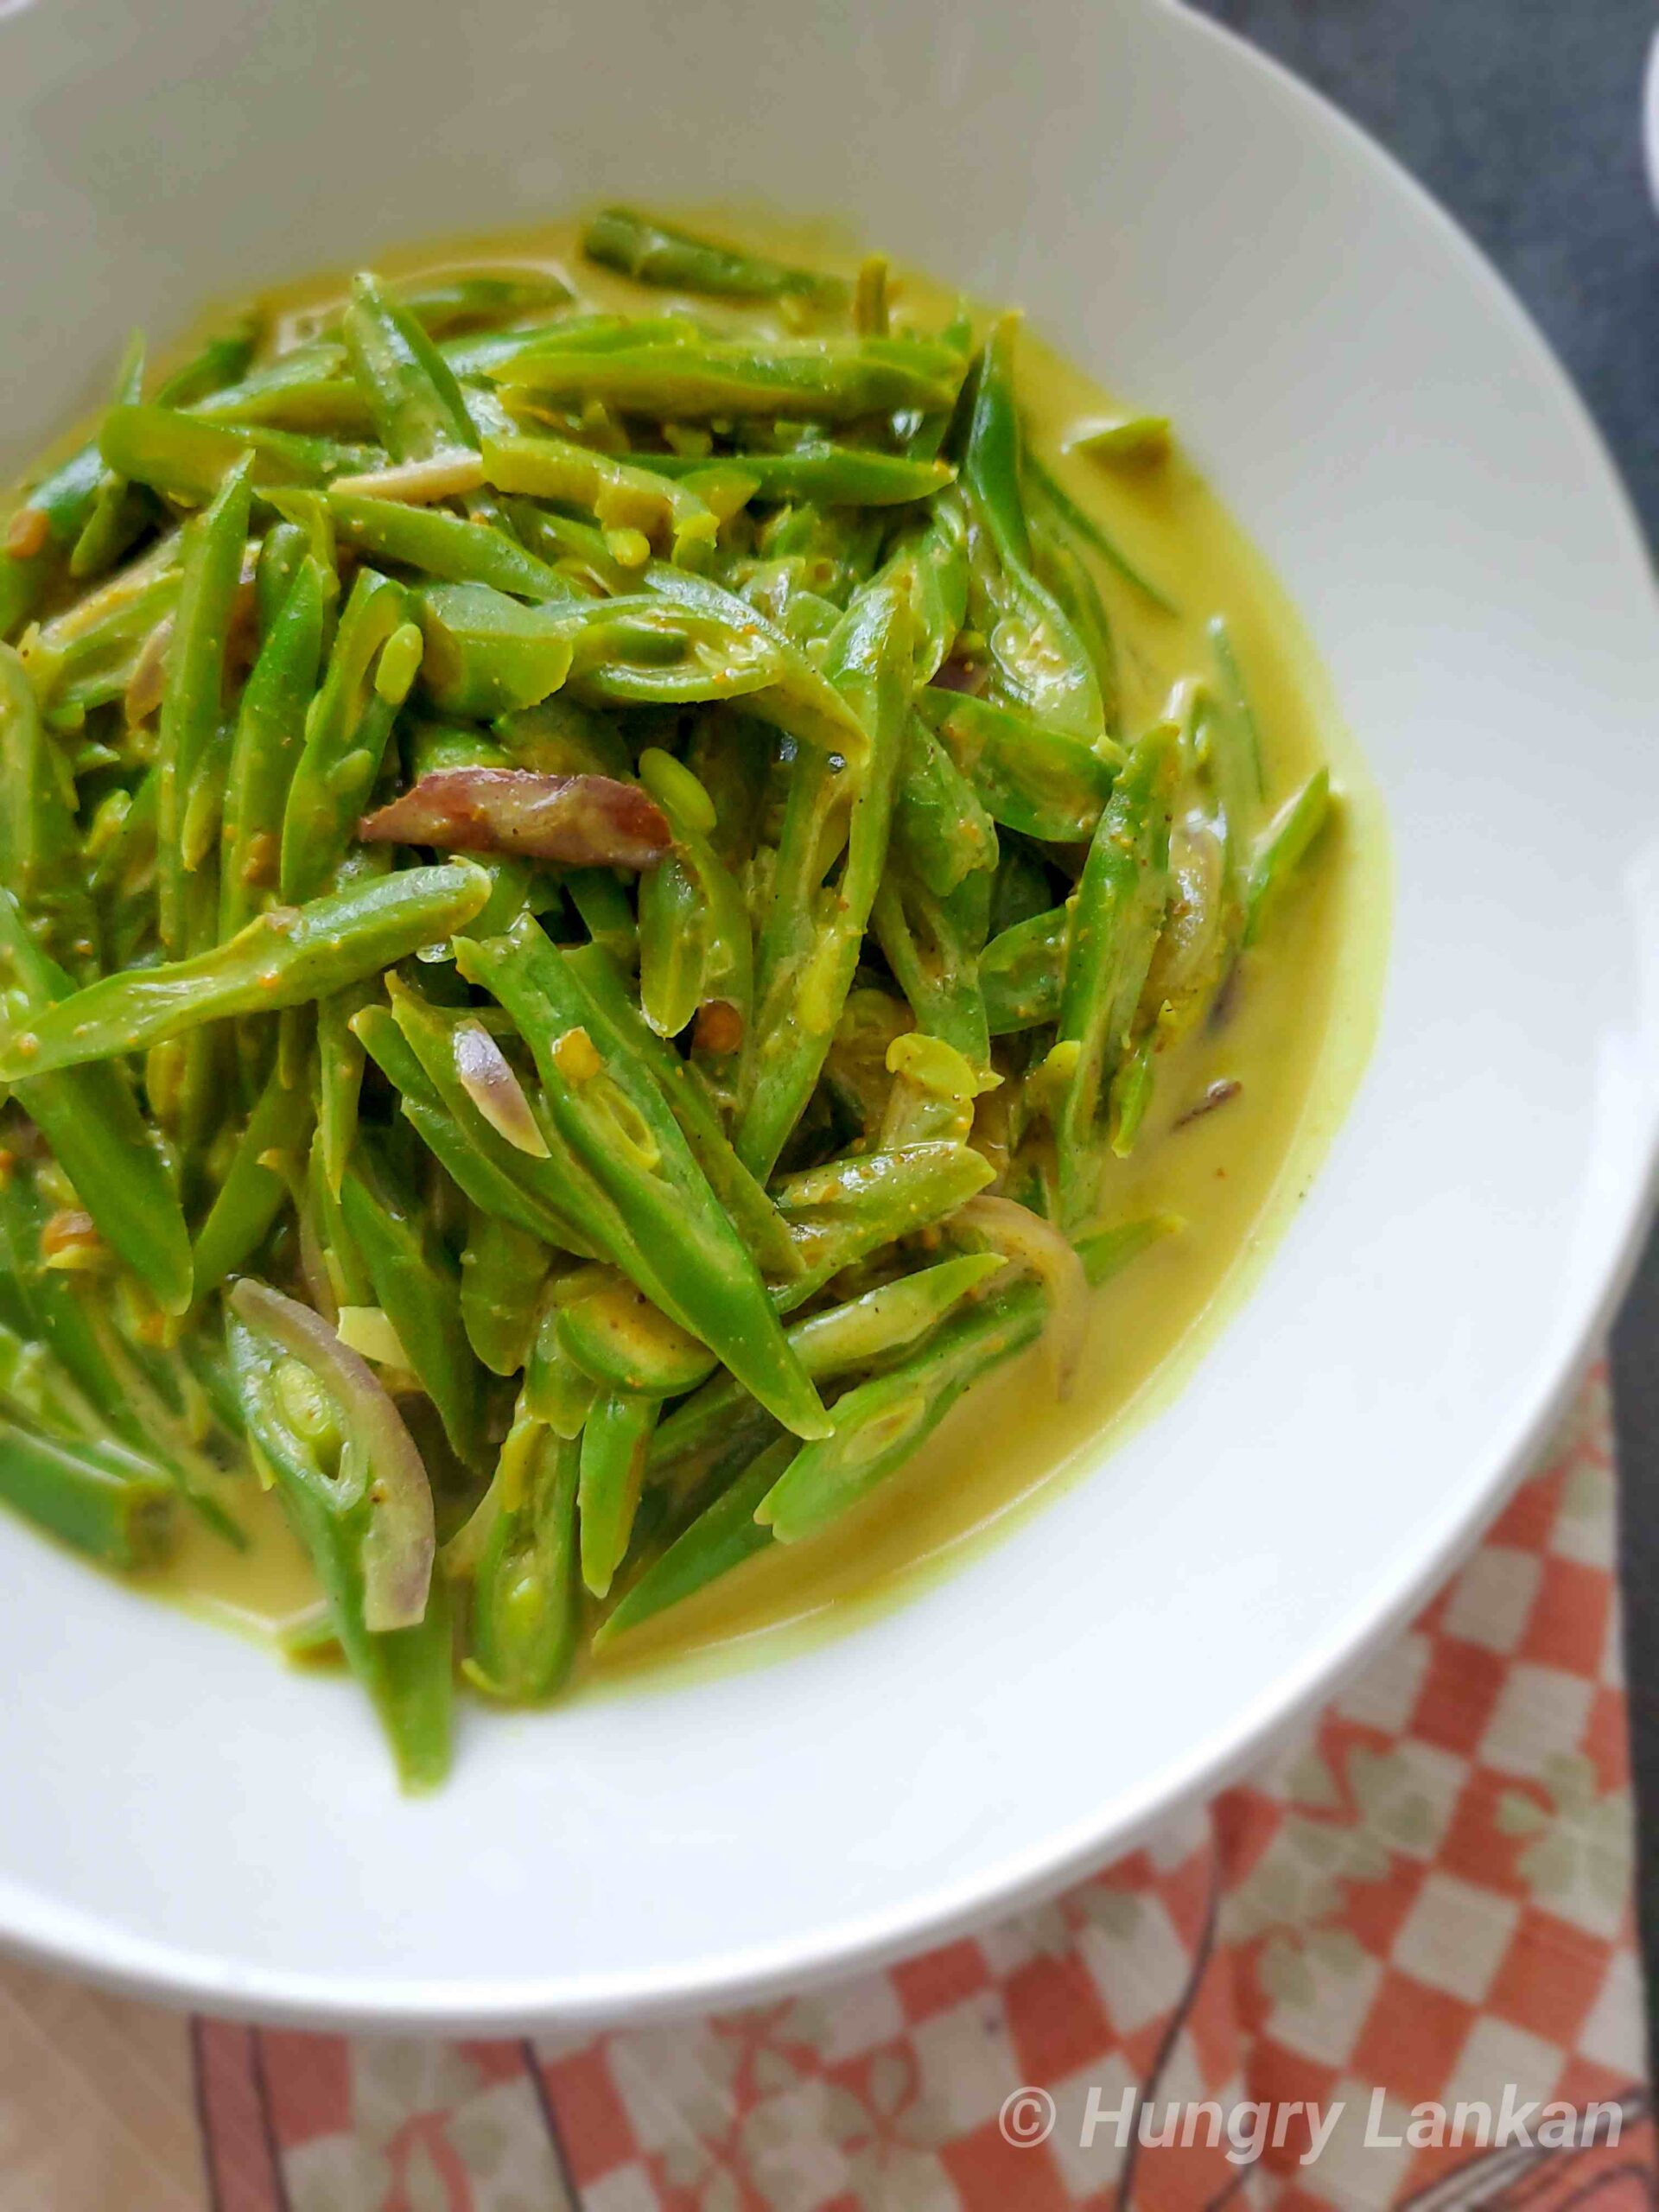 Vegan green bean curry with coconut milk - Hungry Lankan